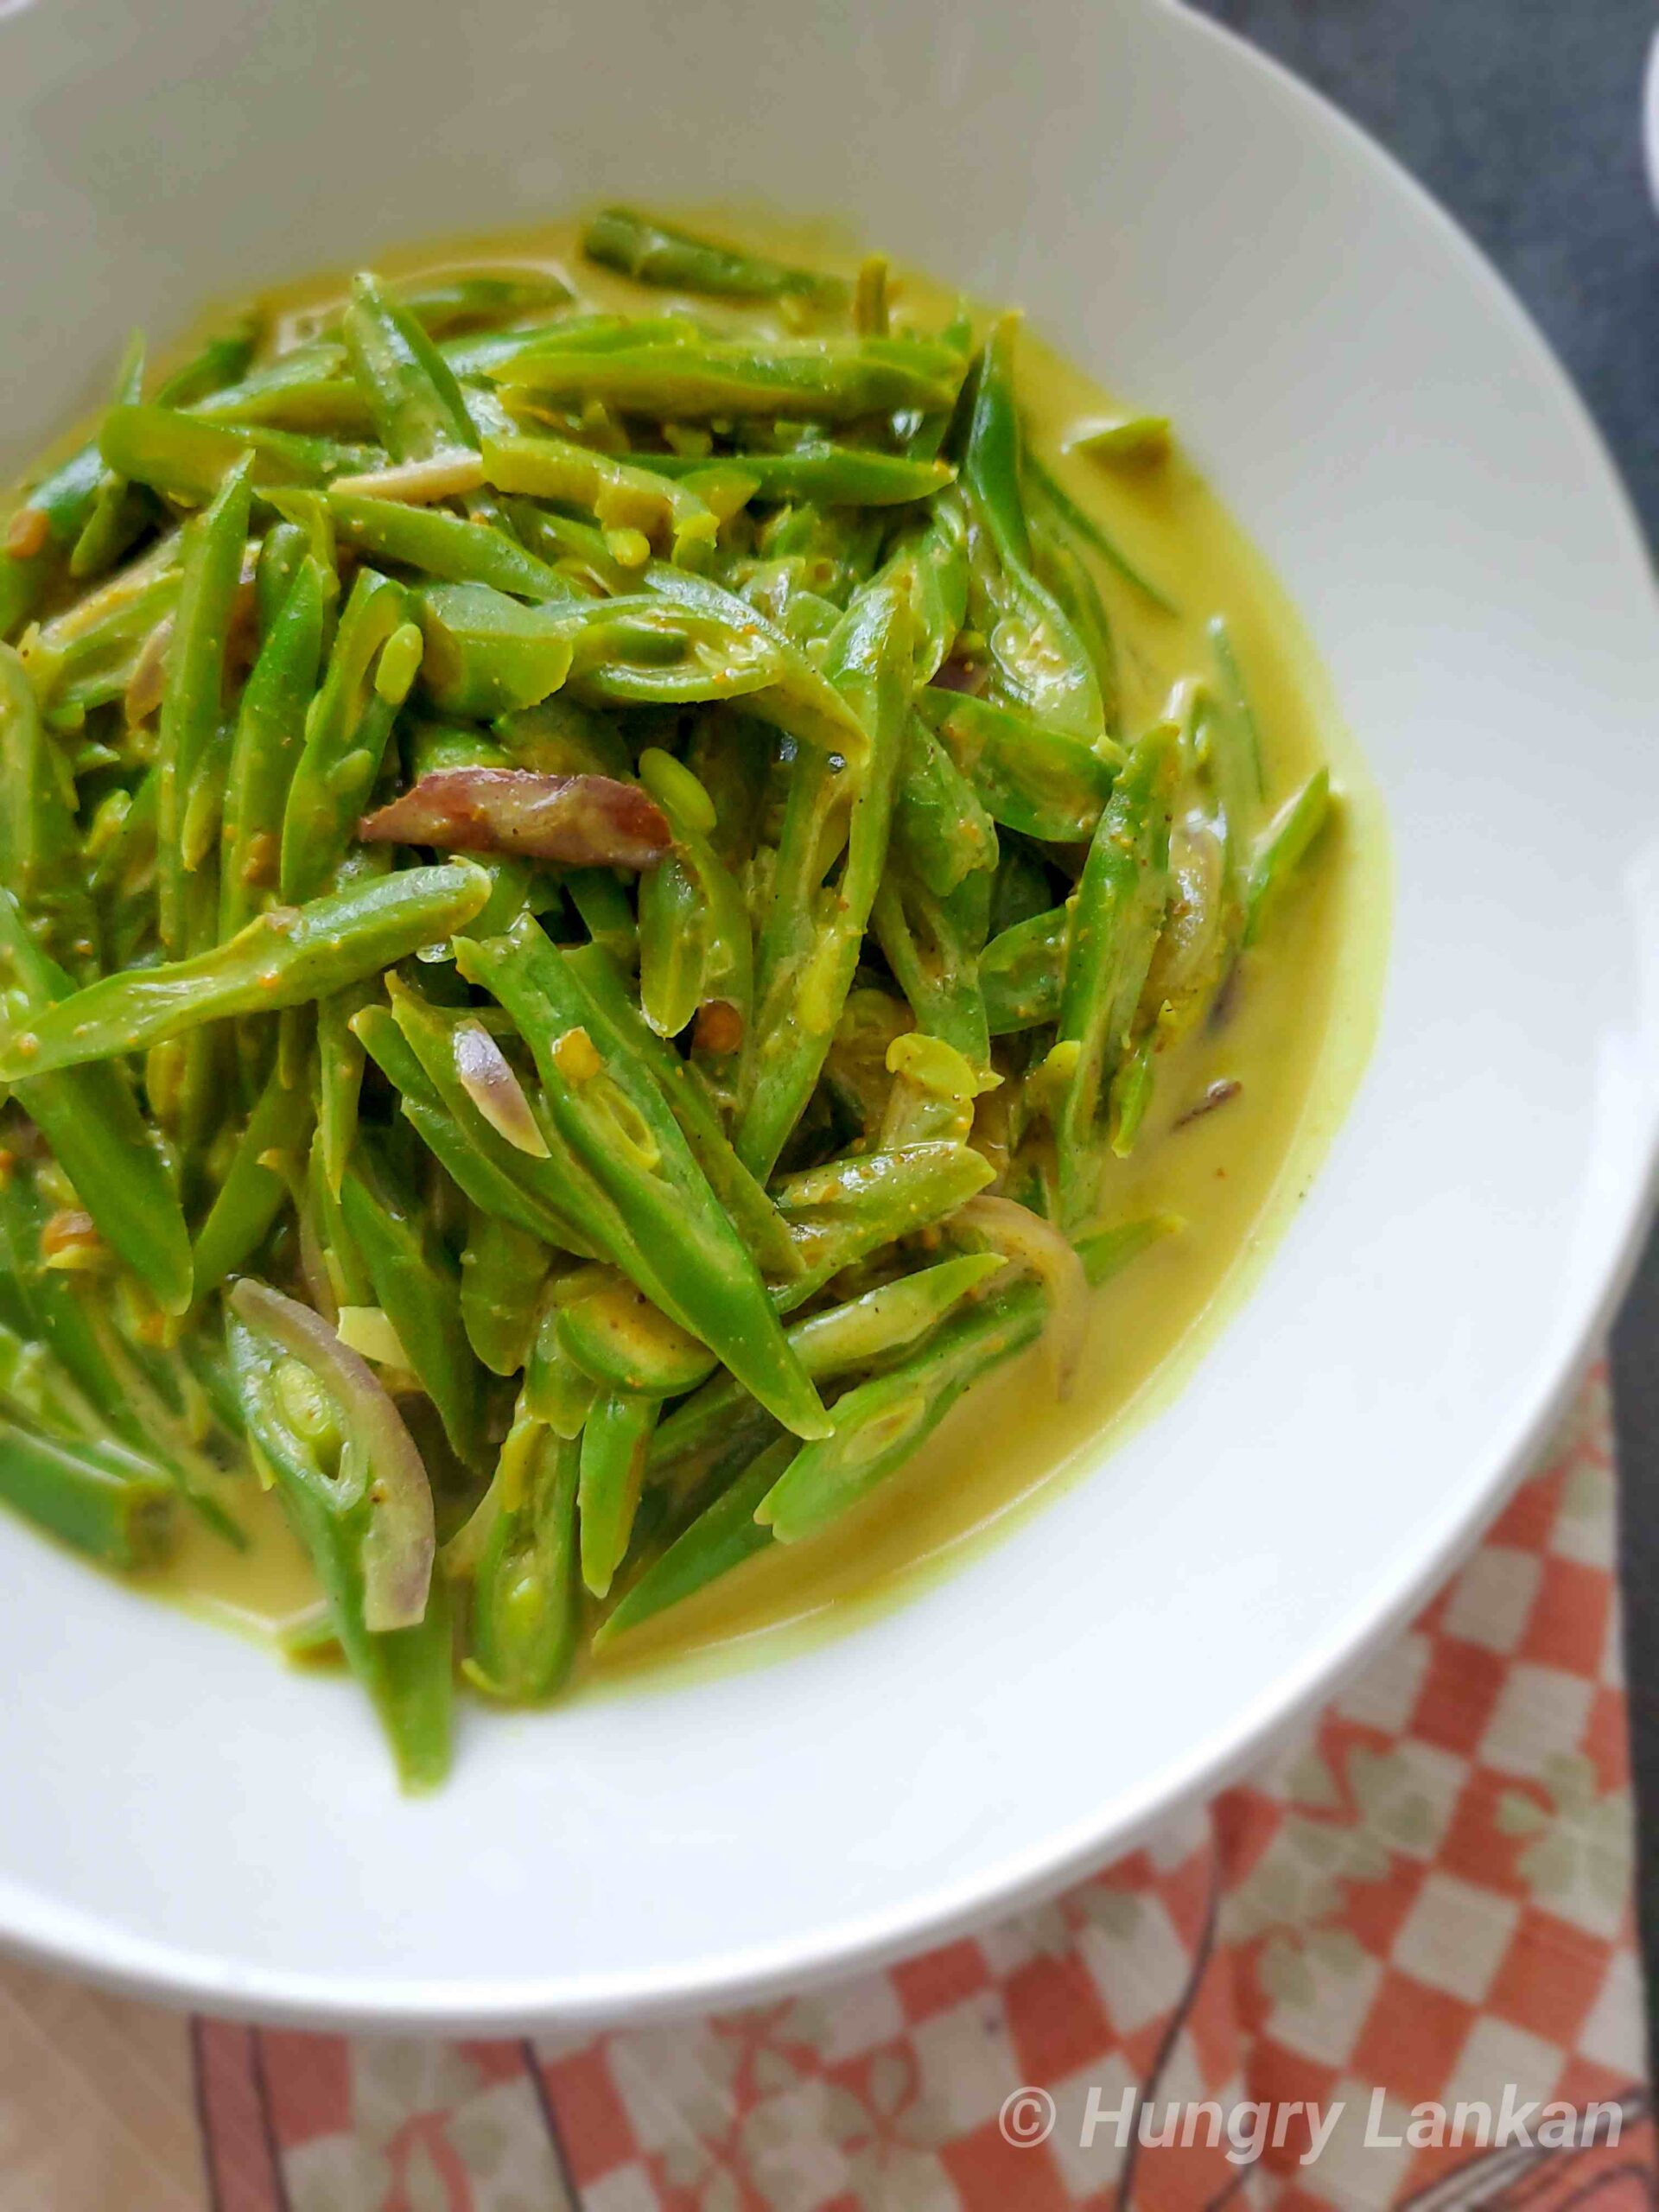 Vegan green bean curry with coconut milk - Hungry Lankan